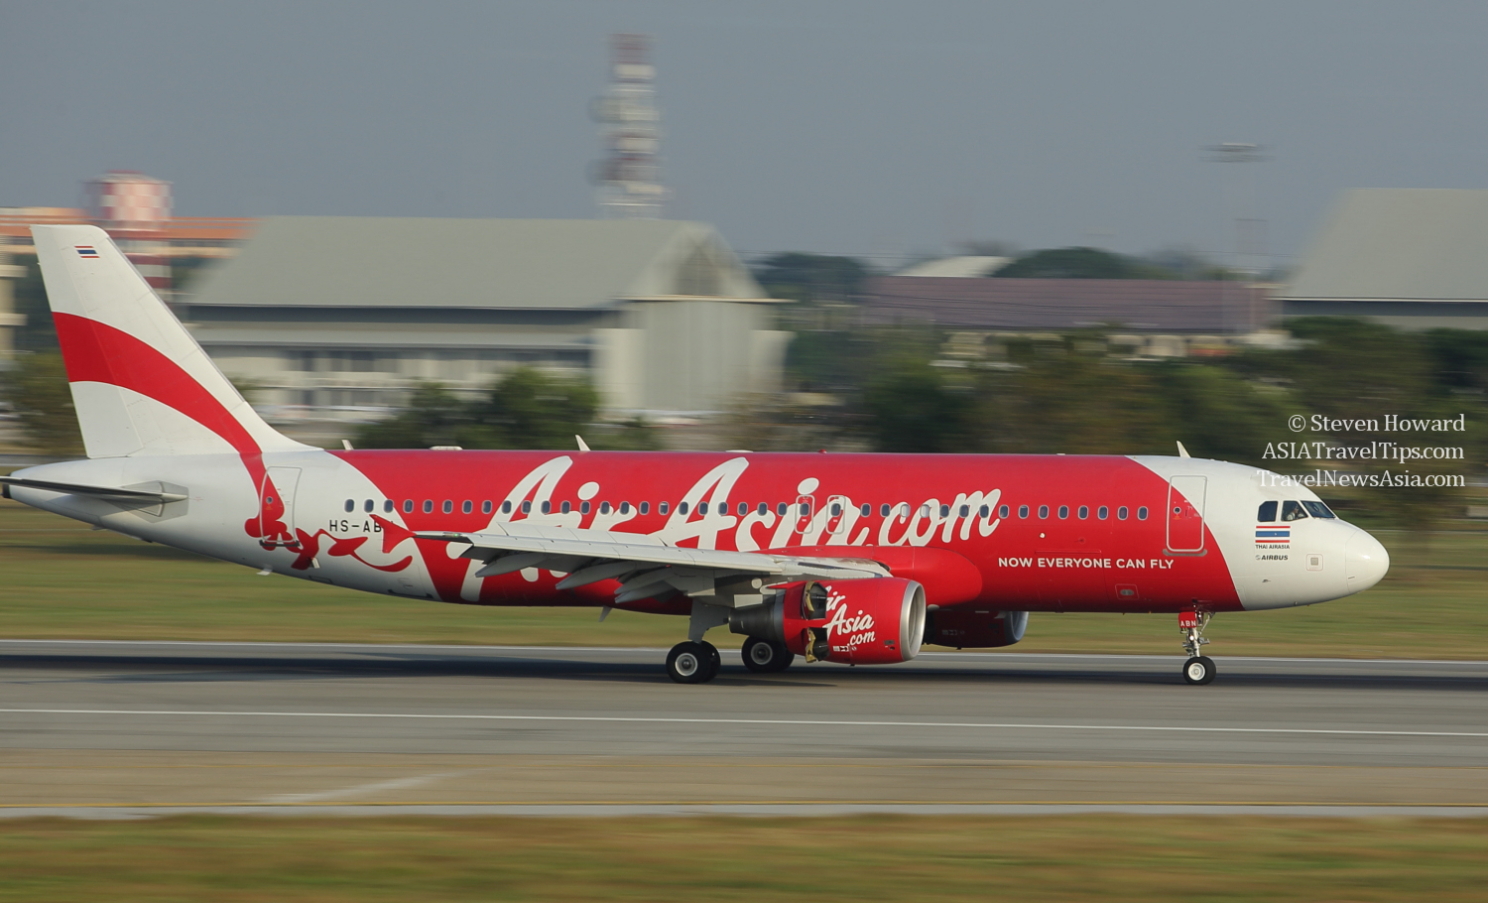 Thai AirAsia Airbus A320 at DMK. Picture by Steven Howard of TravelNewsAsia.com Click to enlarge.